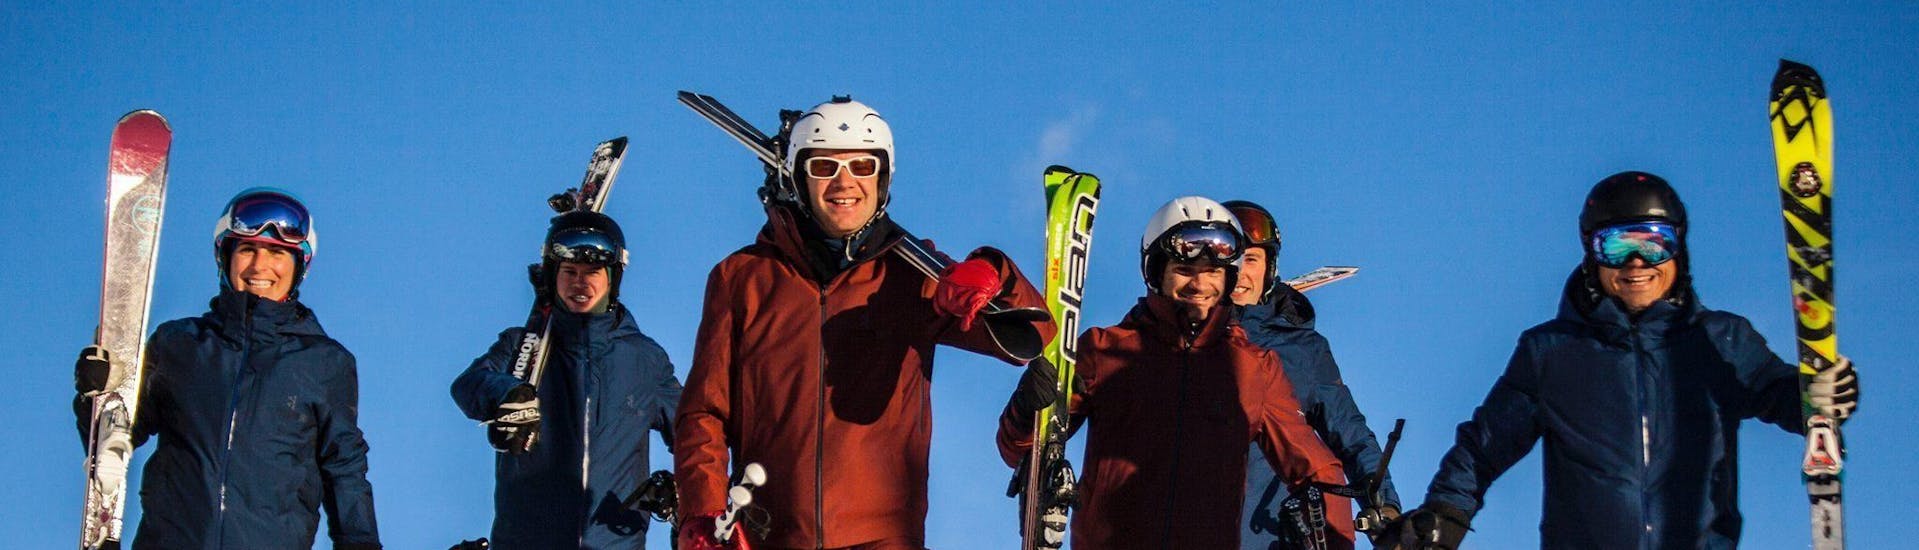 Private Ski Lessons for Adults of All Levels - Morning with Ski School PassionSki - St. Moritz - Hero image